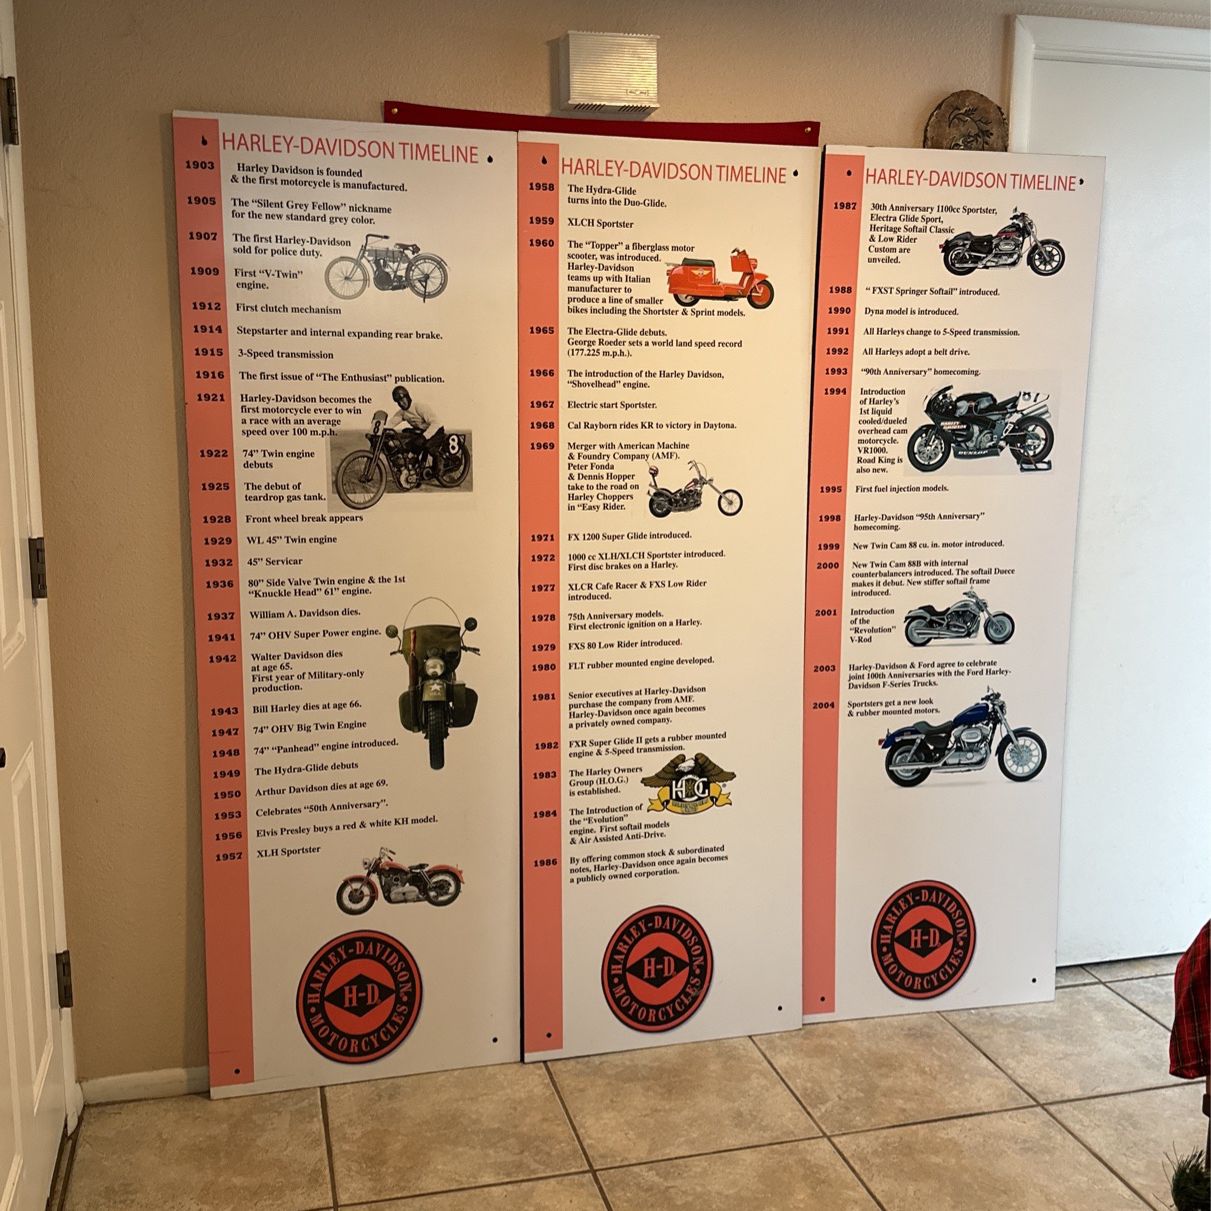 HARLEY DAVIDSON 1904 To 2004 Wall Placards